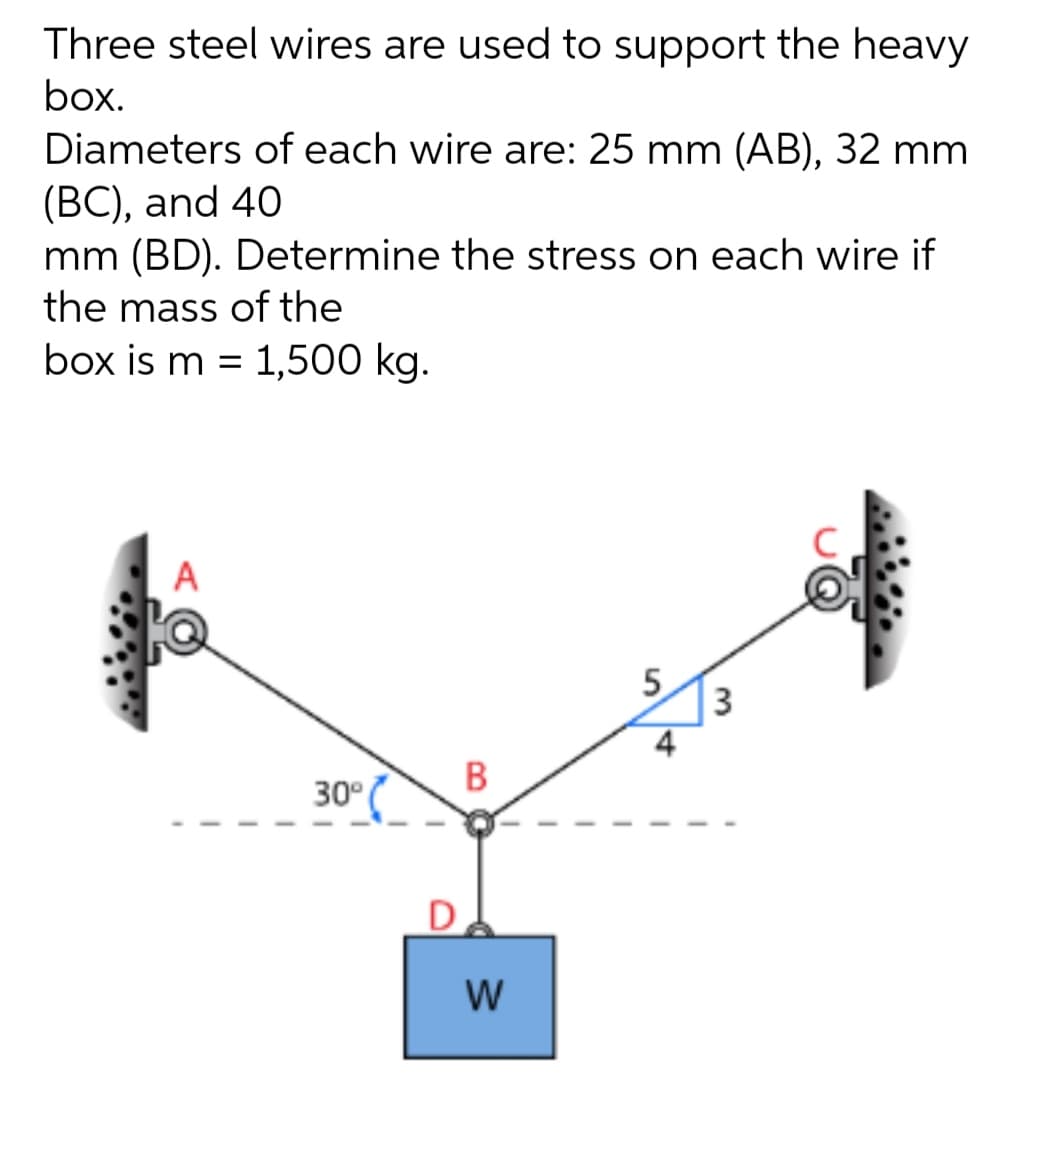 Three steel wires are used to support the heavy
box.
Diameters of each wire are: 25 mm (AB), 32 mm
(BC), and 40
mm (BD). Determine the stress on each wire if
the mass of the
box is m = 1,500 kg.
A
5
30°
B
W
4
3